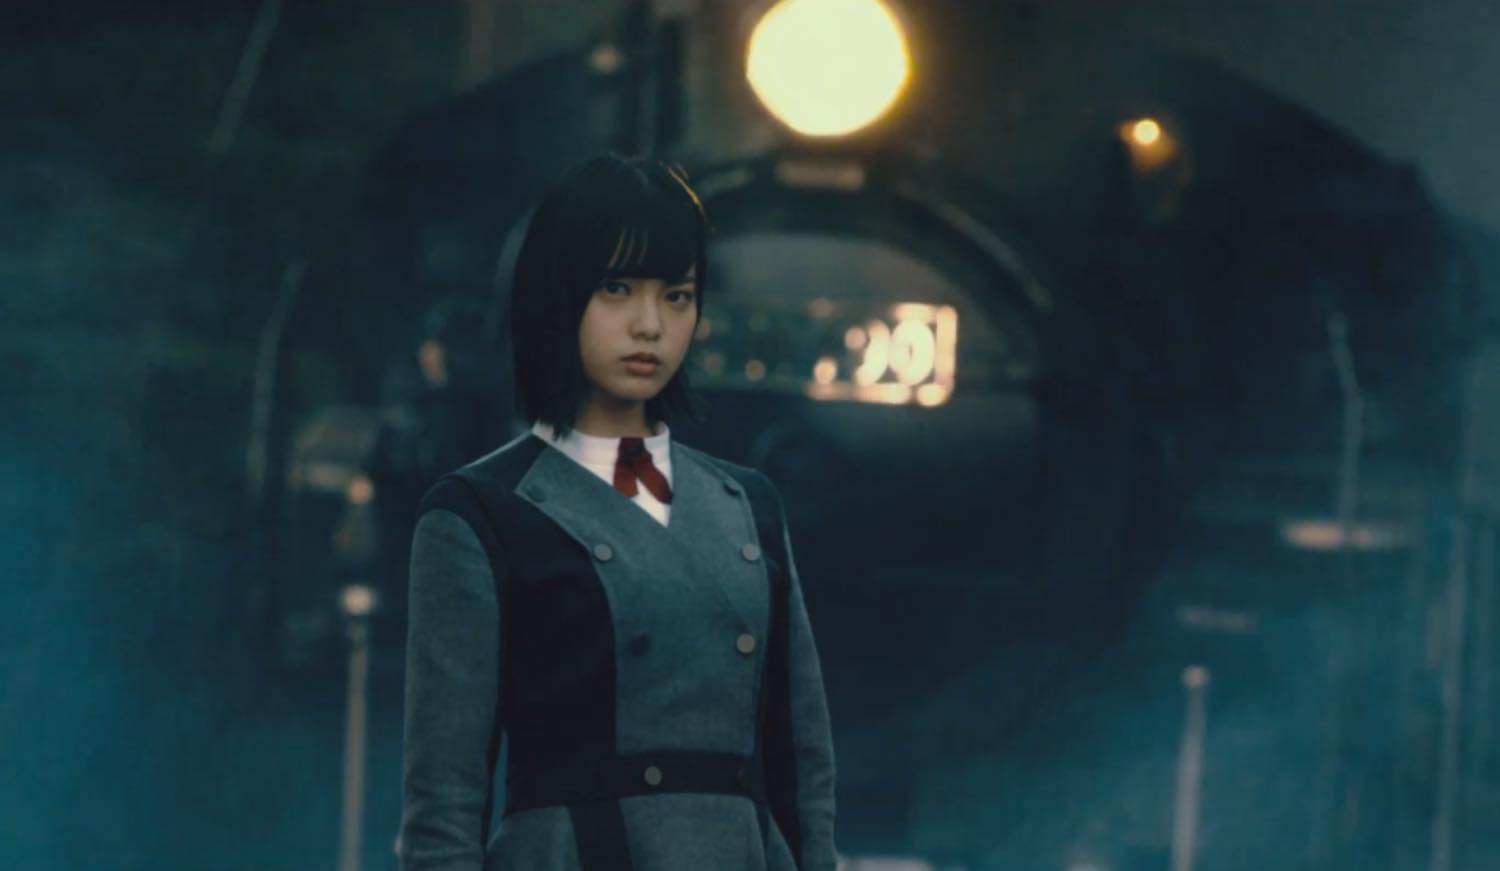 The Keyakizaka46 Express Continues Rolling Through 2016 With 3 More MVs from 3rd Single!